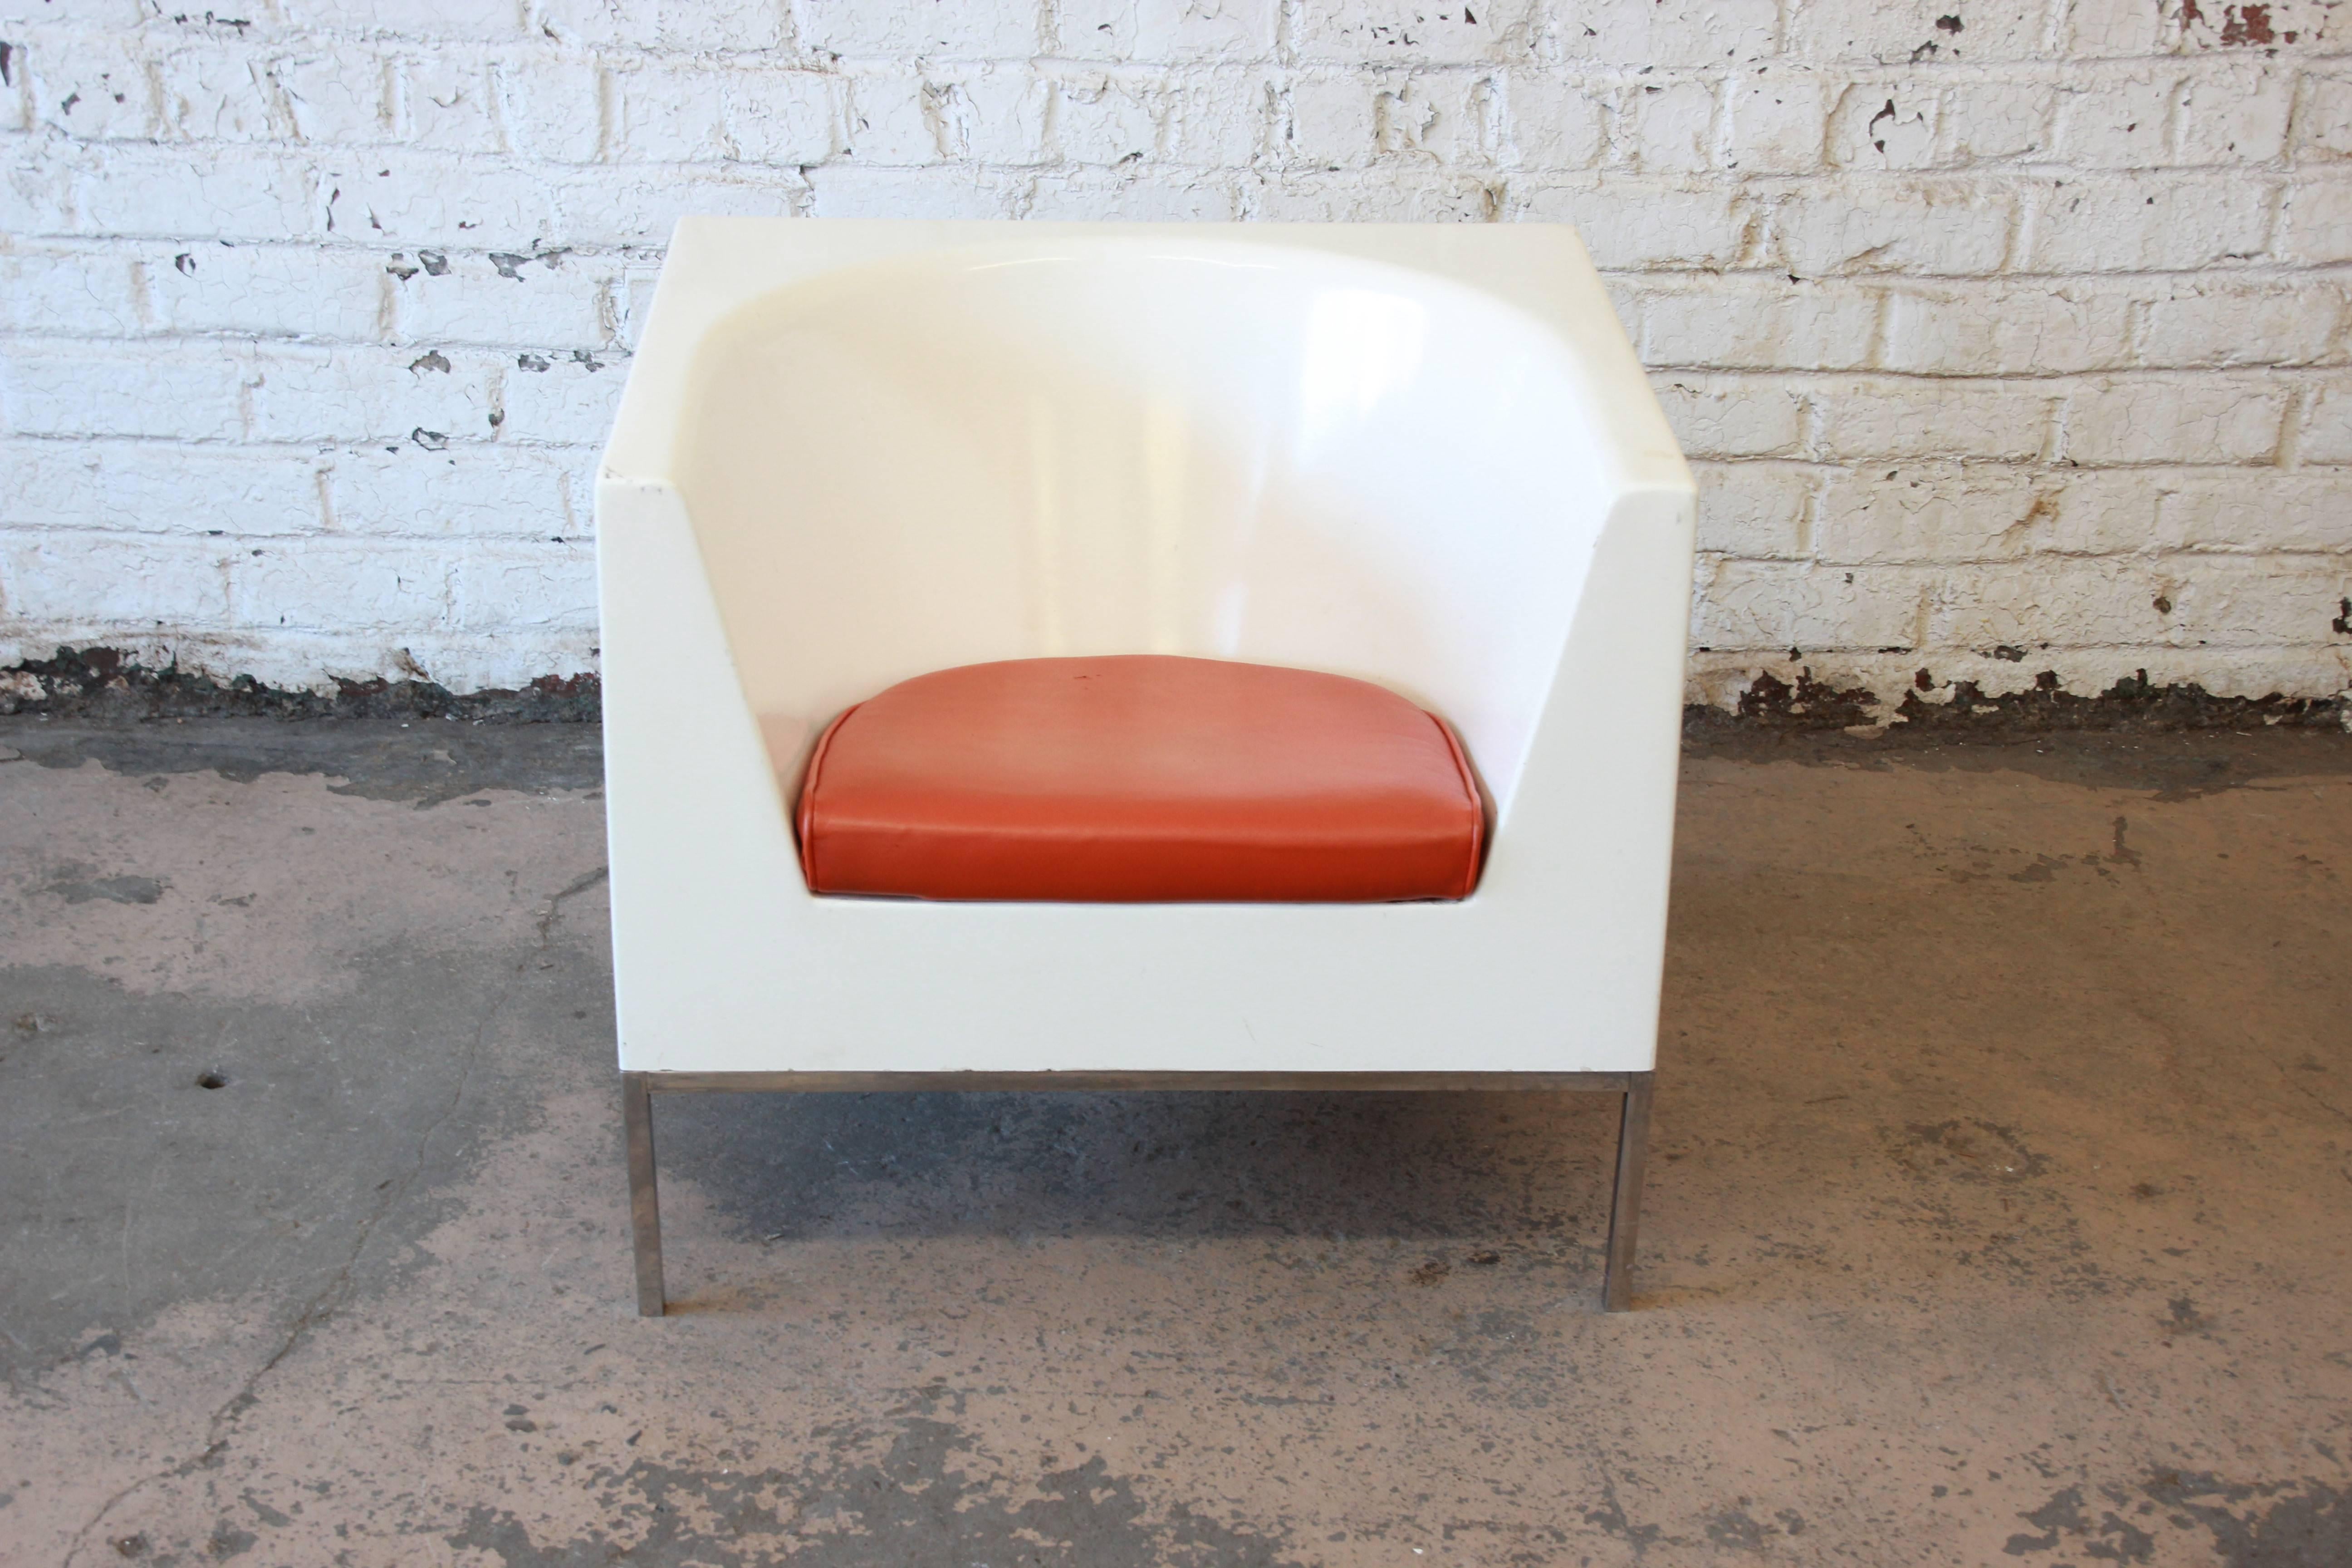 Offering a nice Massimo Vignelli style cube chair with orange upholstered cushion. The white molded cube chair rests on a framed chrome base with square legs. It is in overall good condition with appropriate wear from age and use.